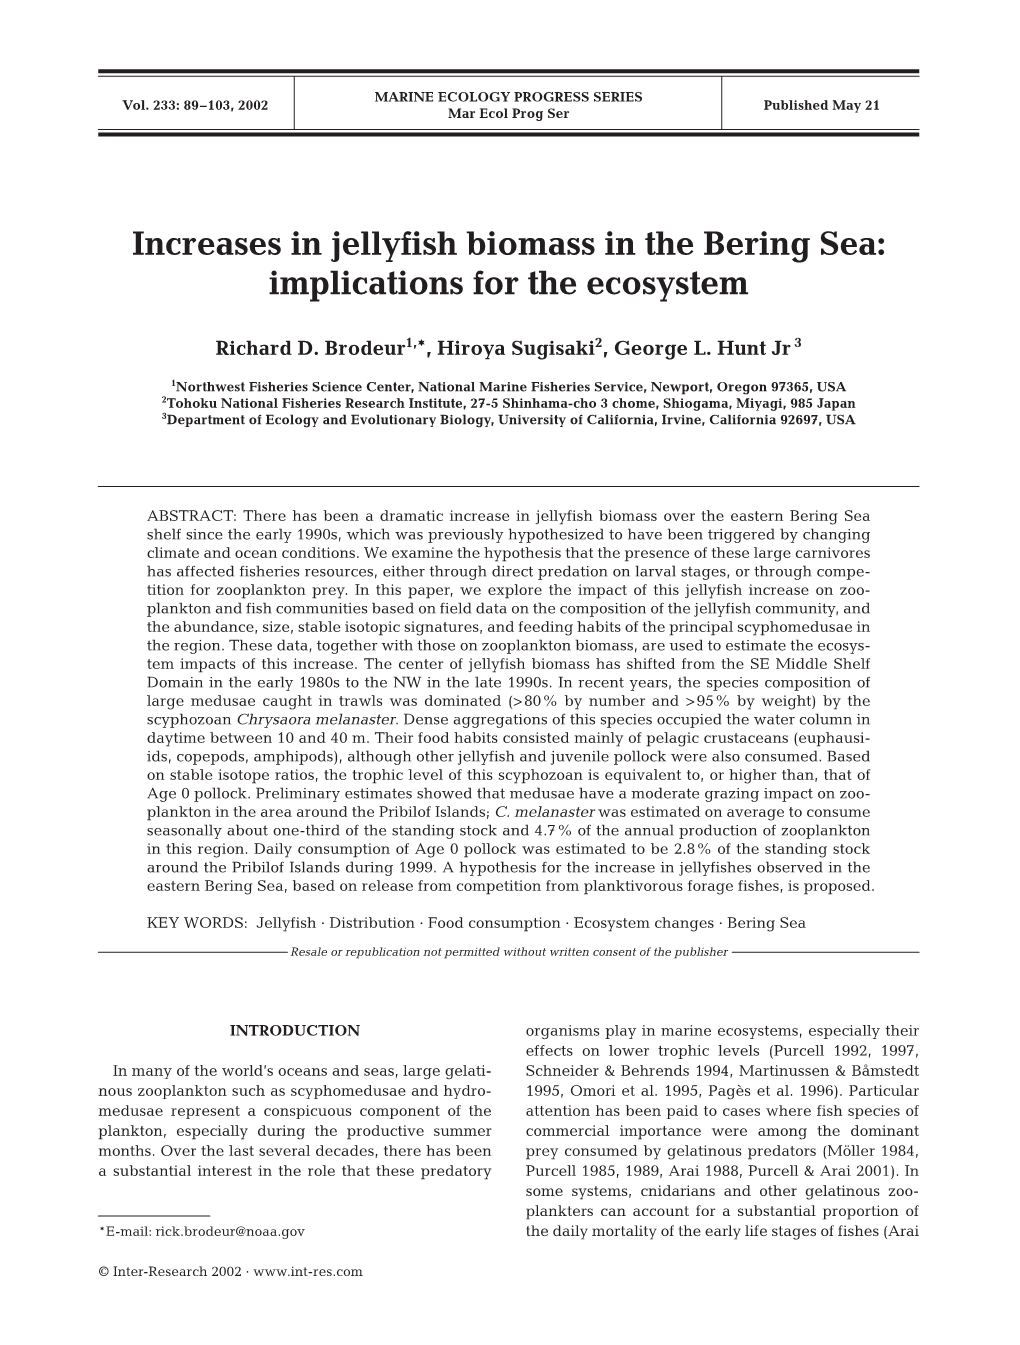 Increases in Jellyfish Biomass in the Bering Sea: Implications for the Ecosystem